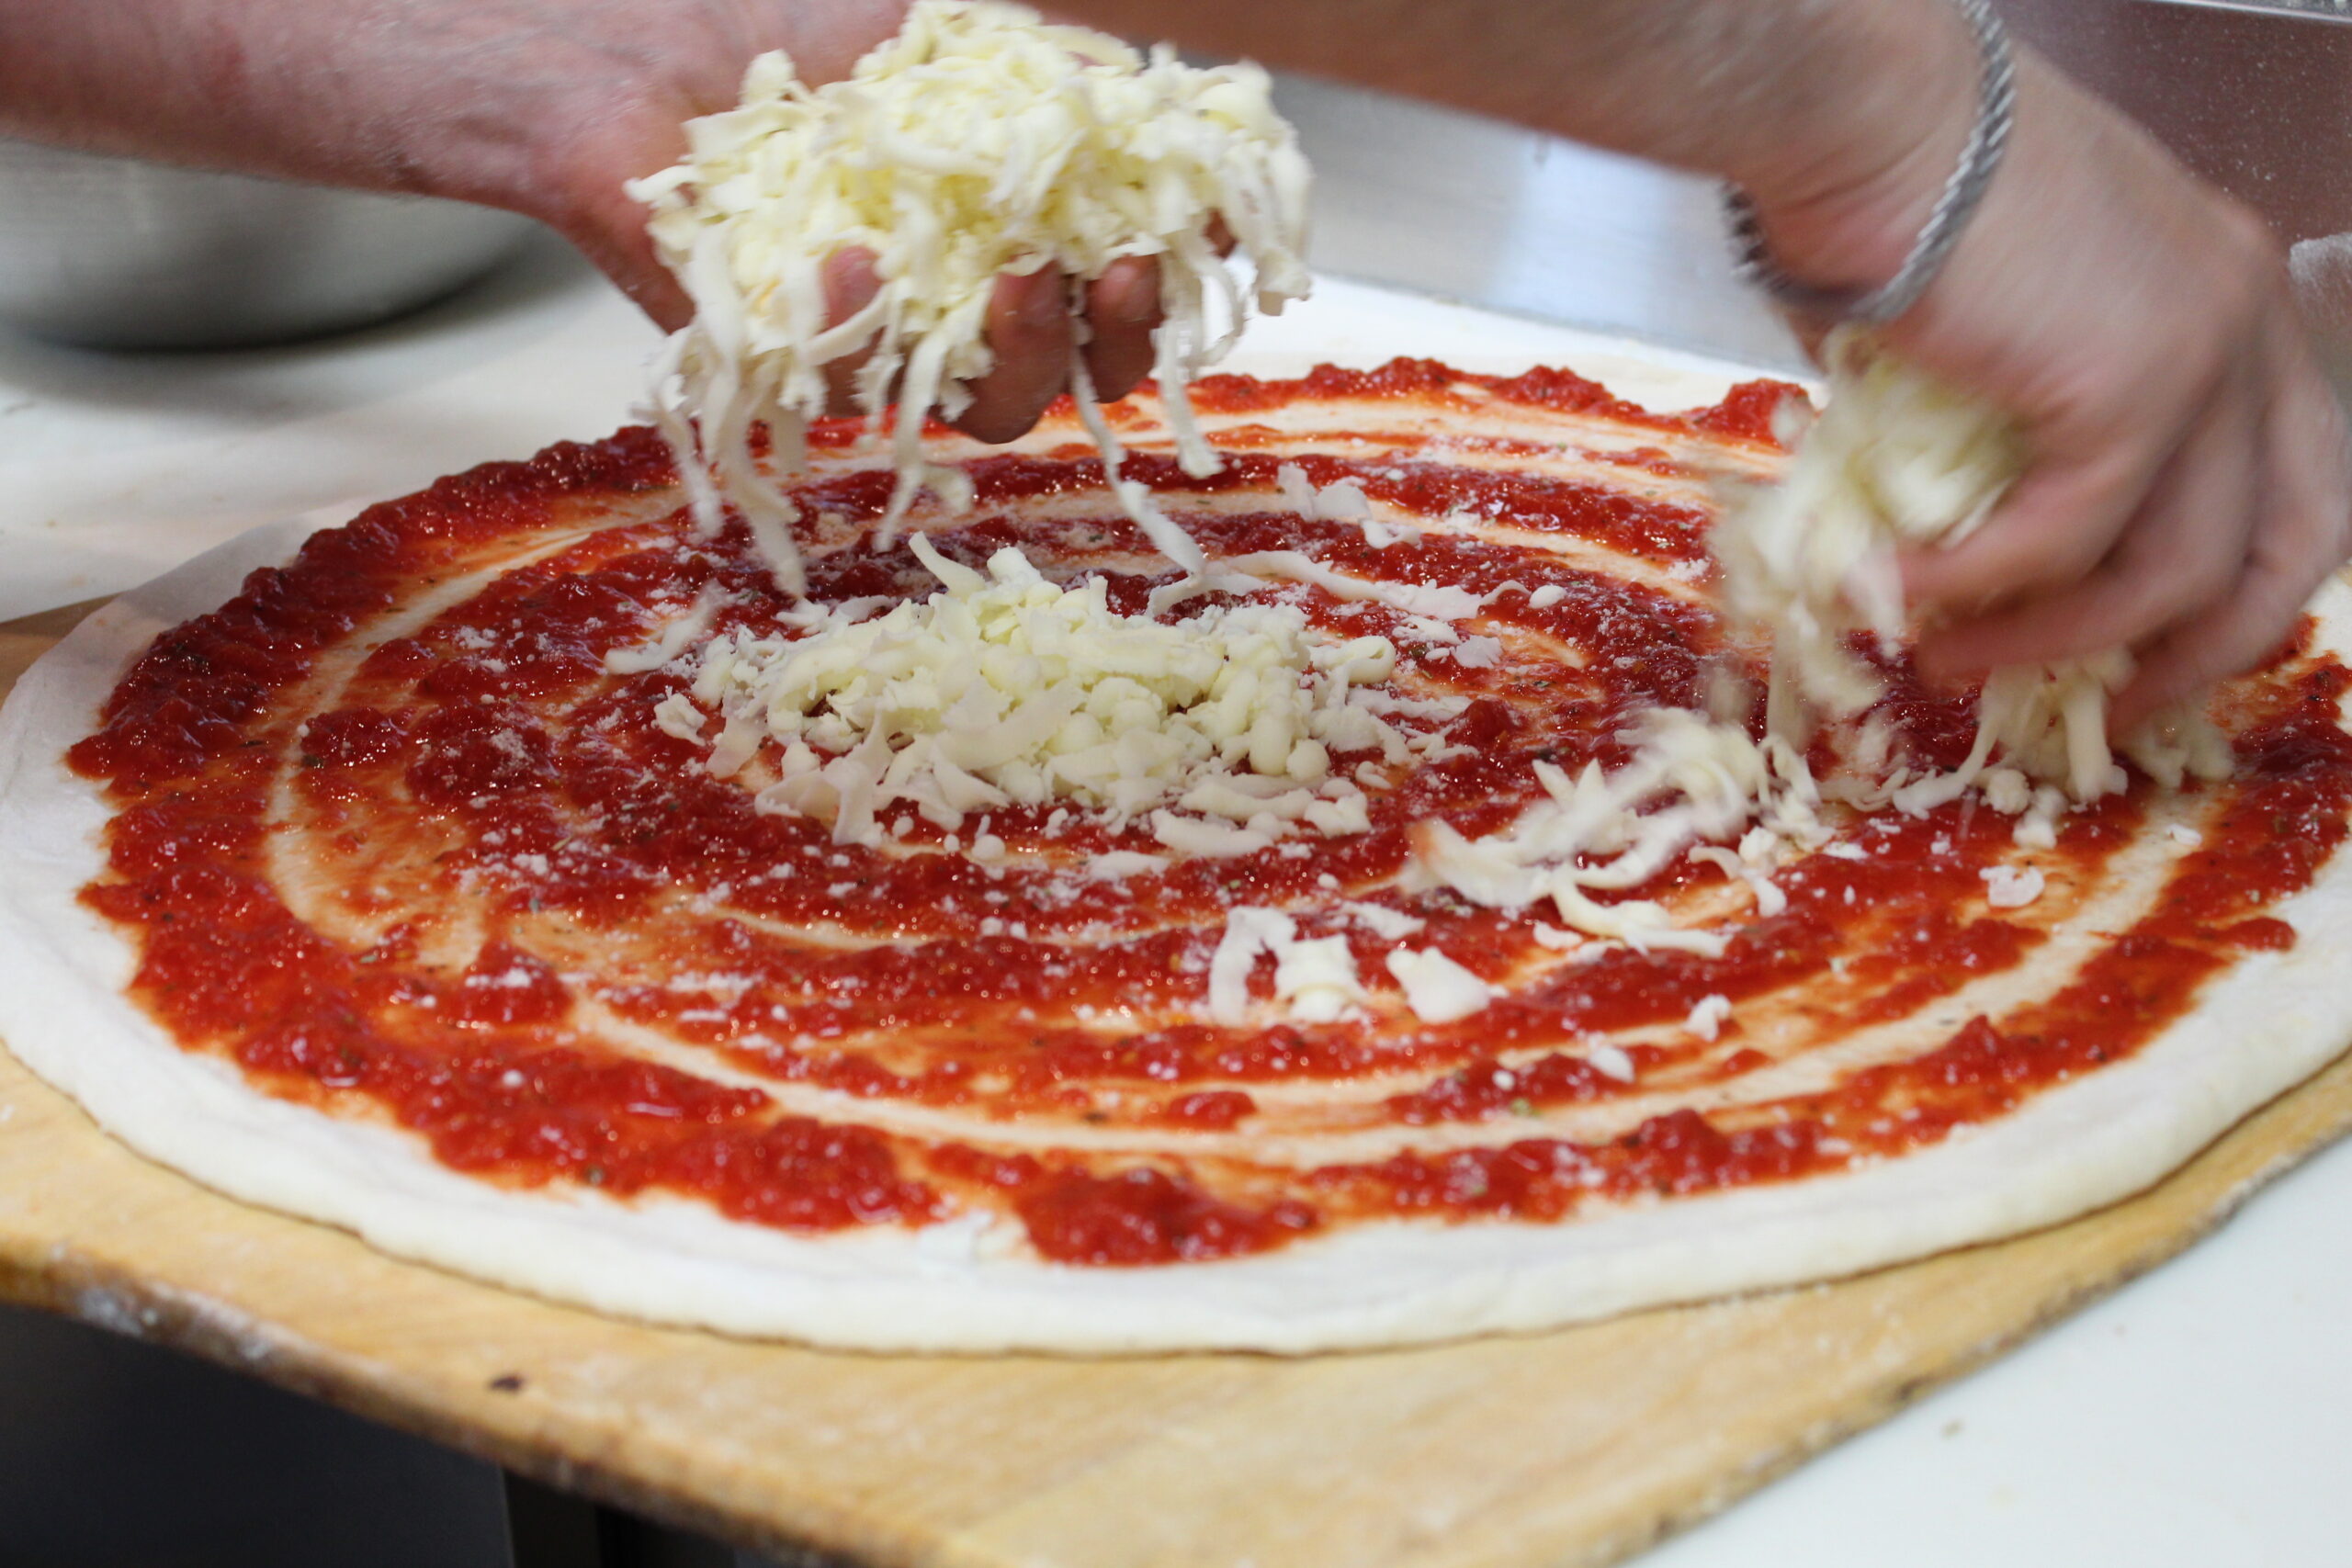 Atlanta Pizza Joint Ranks Among Top 50 Pizzerias in the U.S.